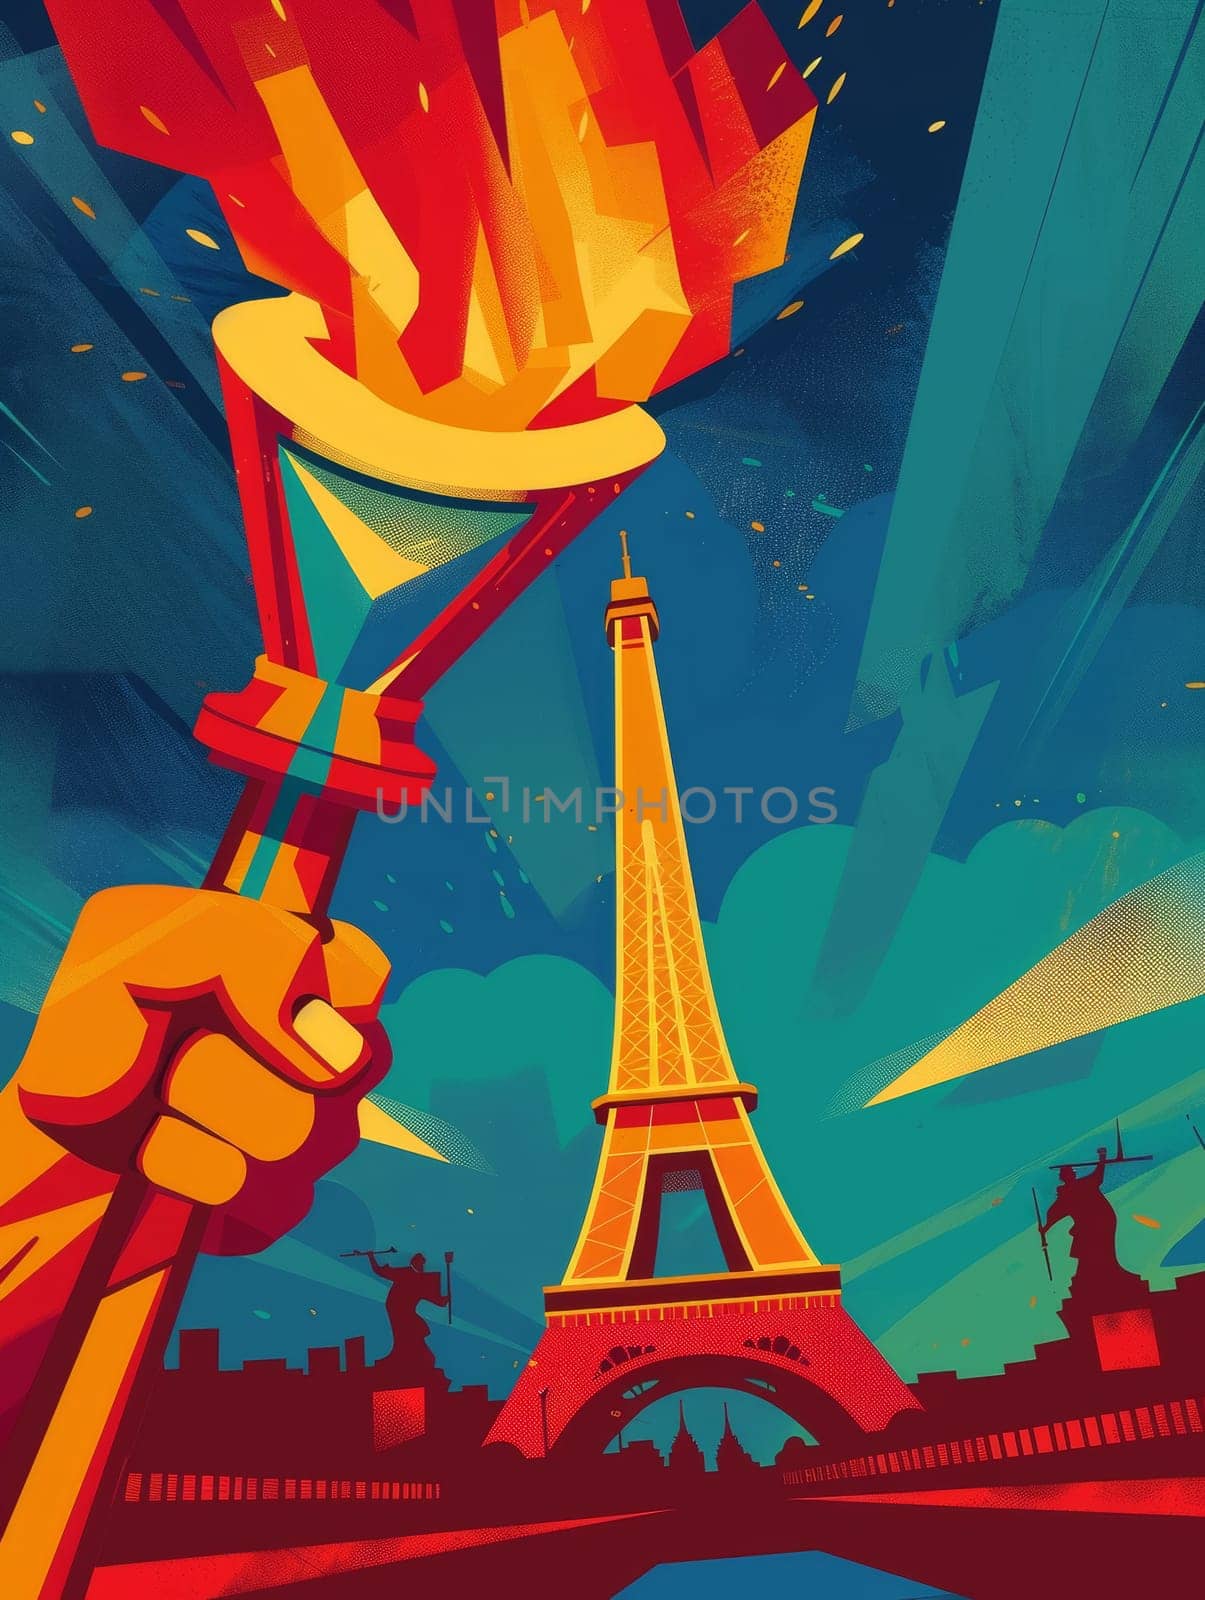 A graphic illustration captures the torch being held aloft in front of the Eiffel Tower, evoking a sense of triumph and celebration at dusk